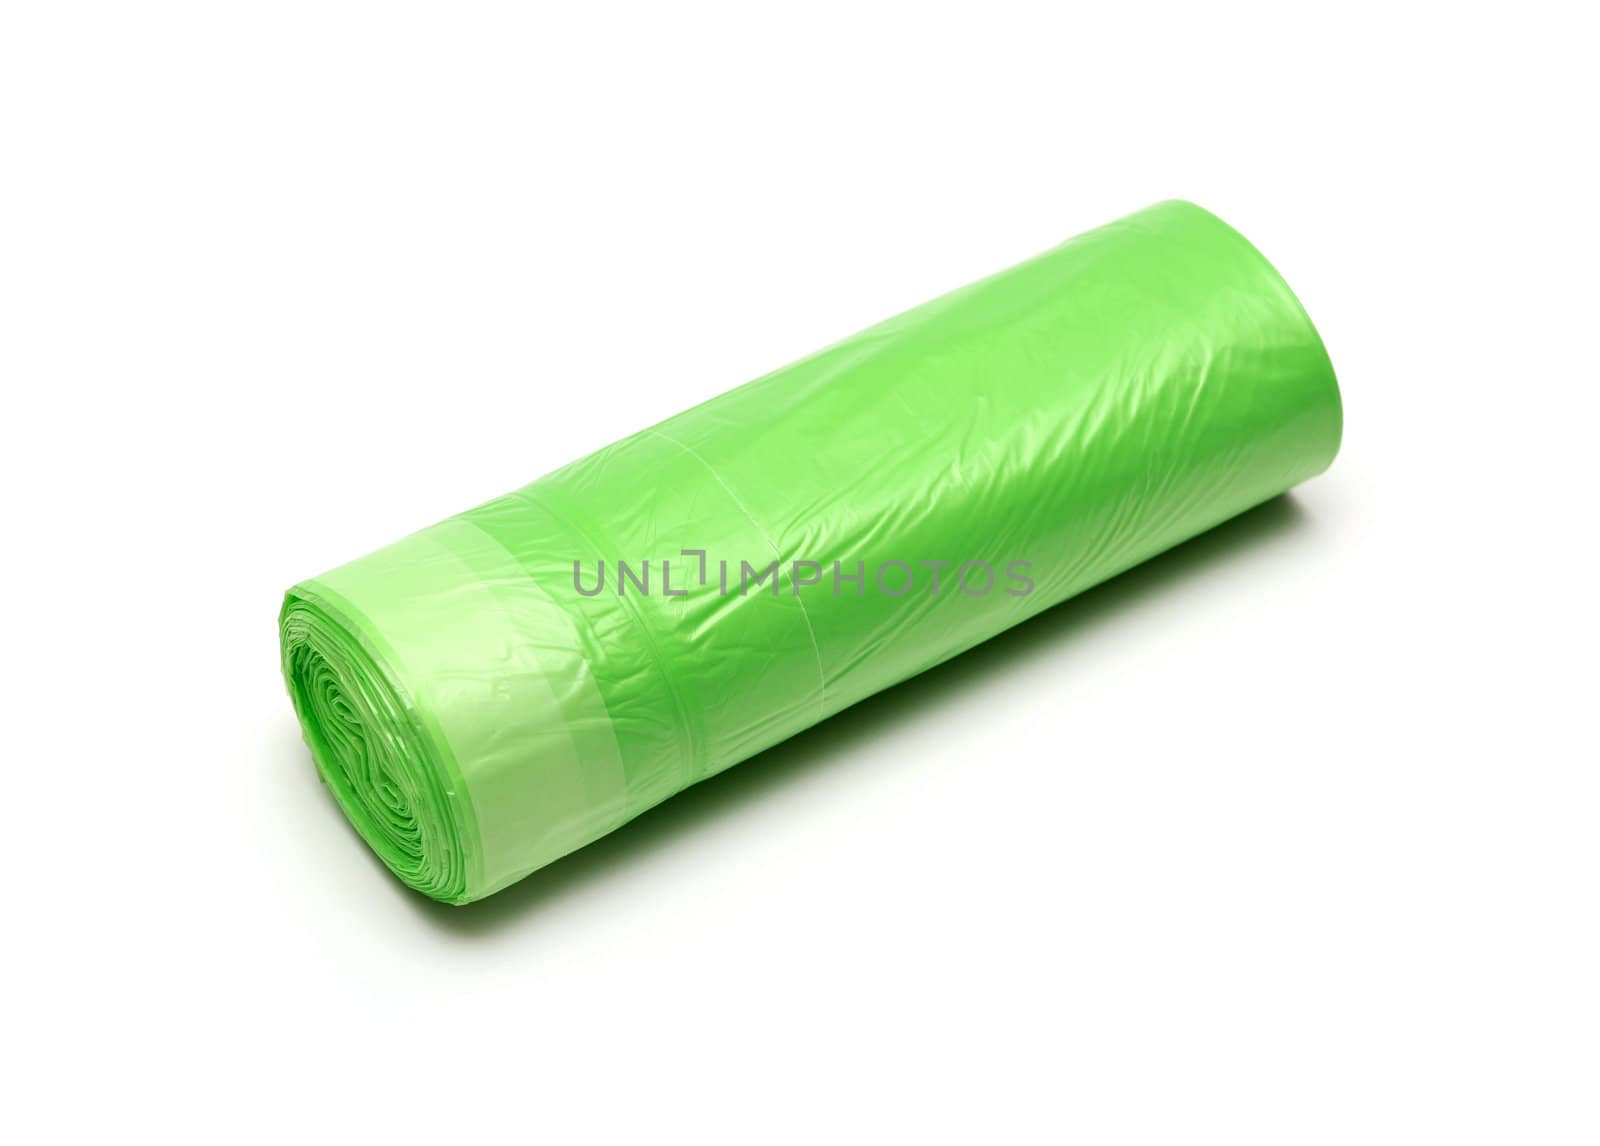 Garbage bag isolated on a white background